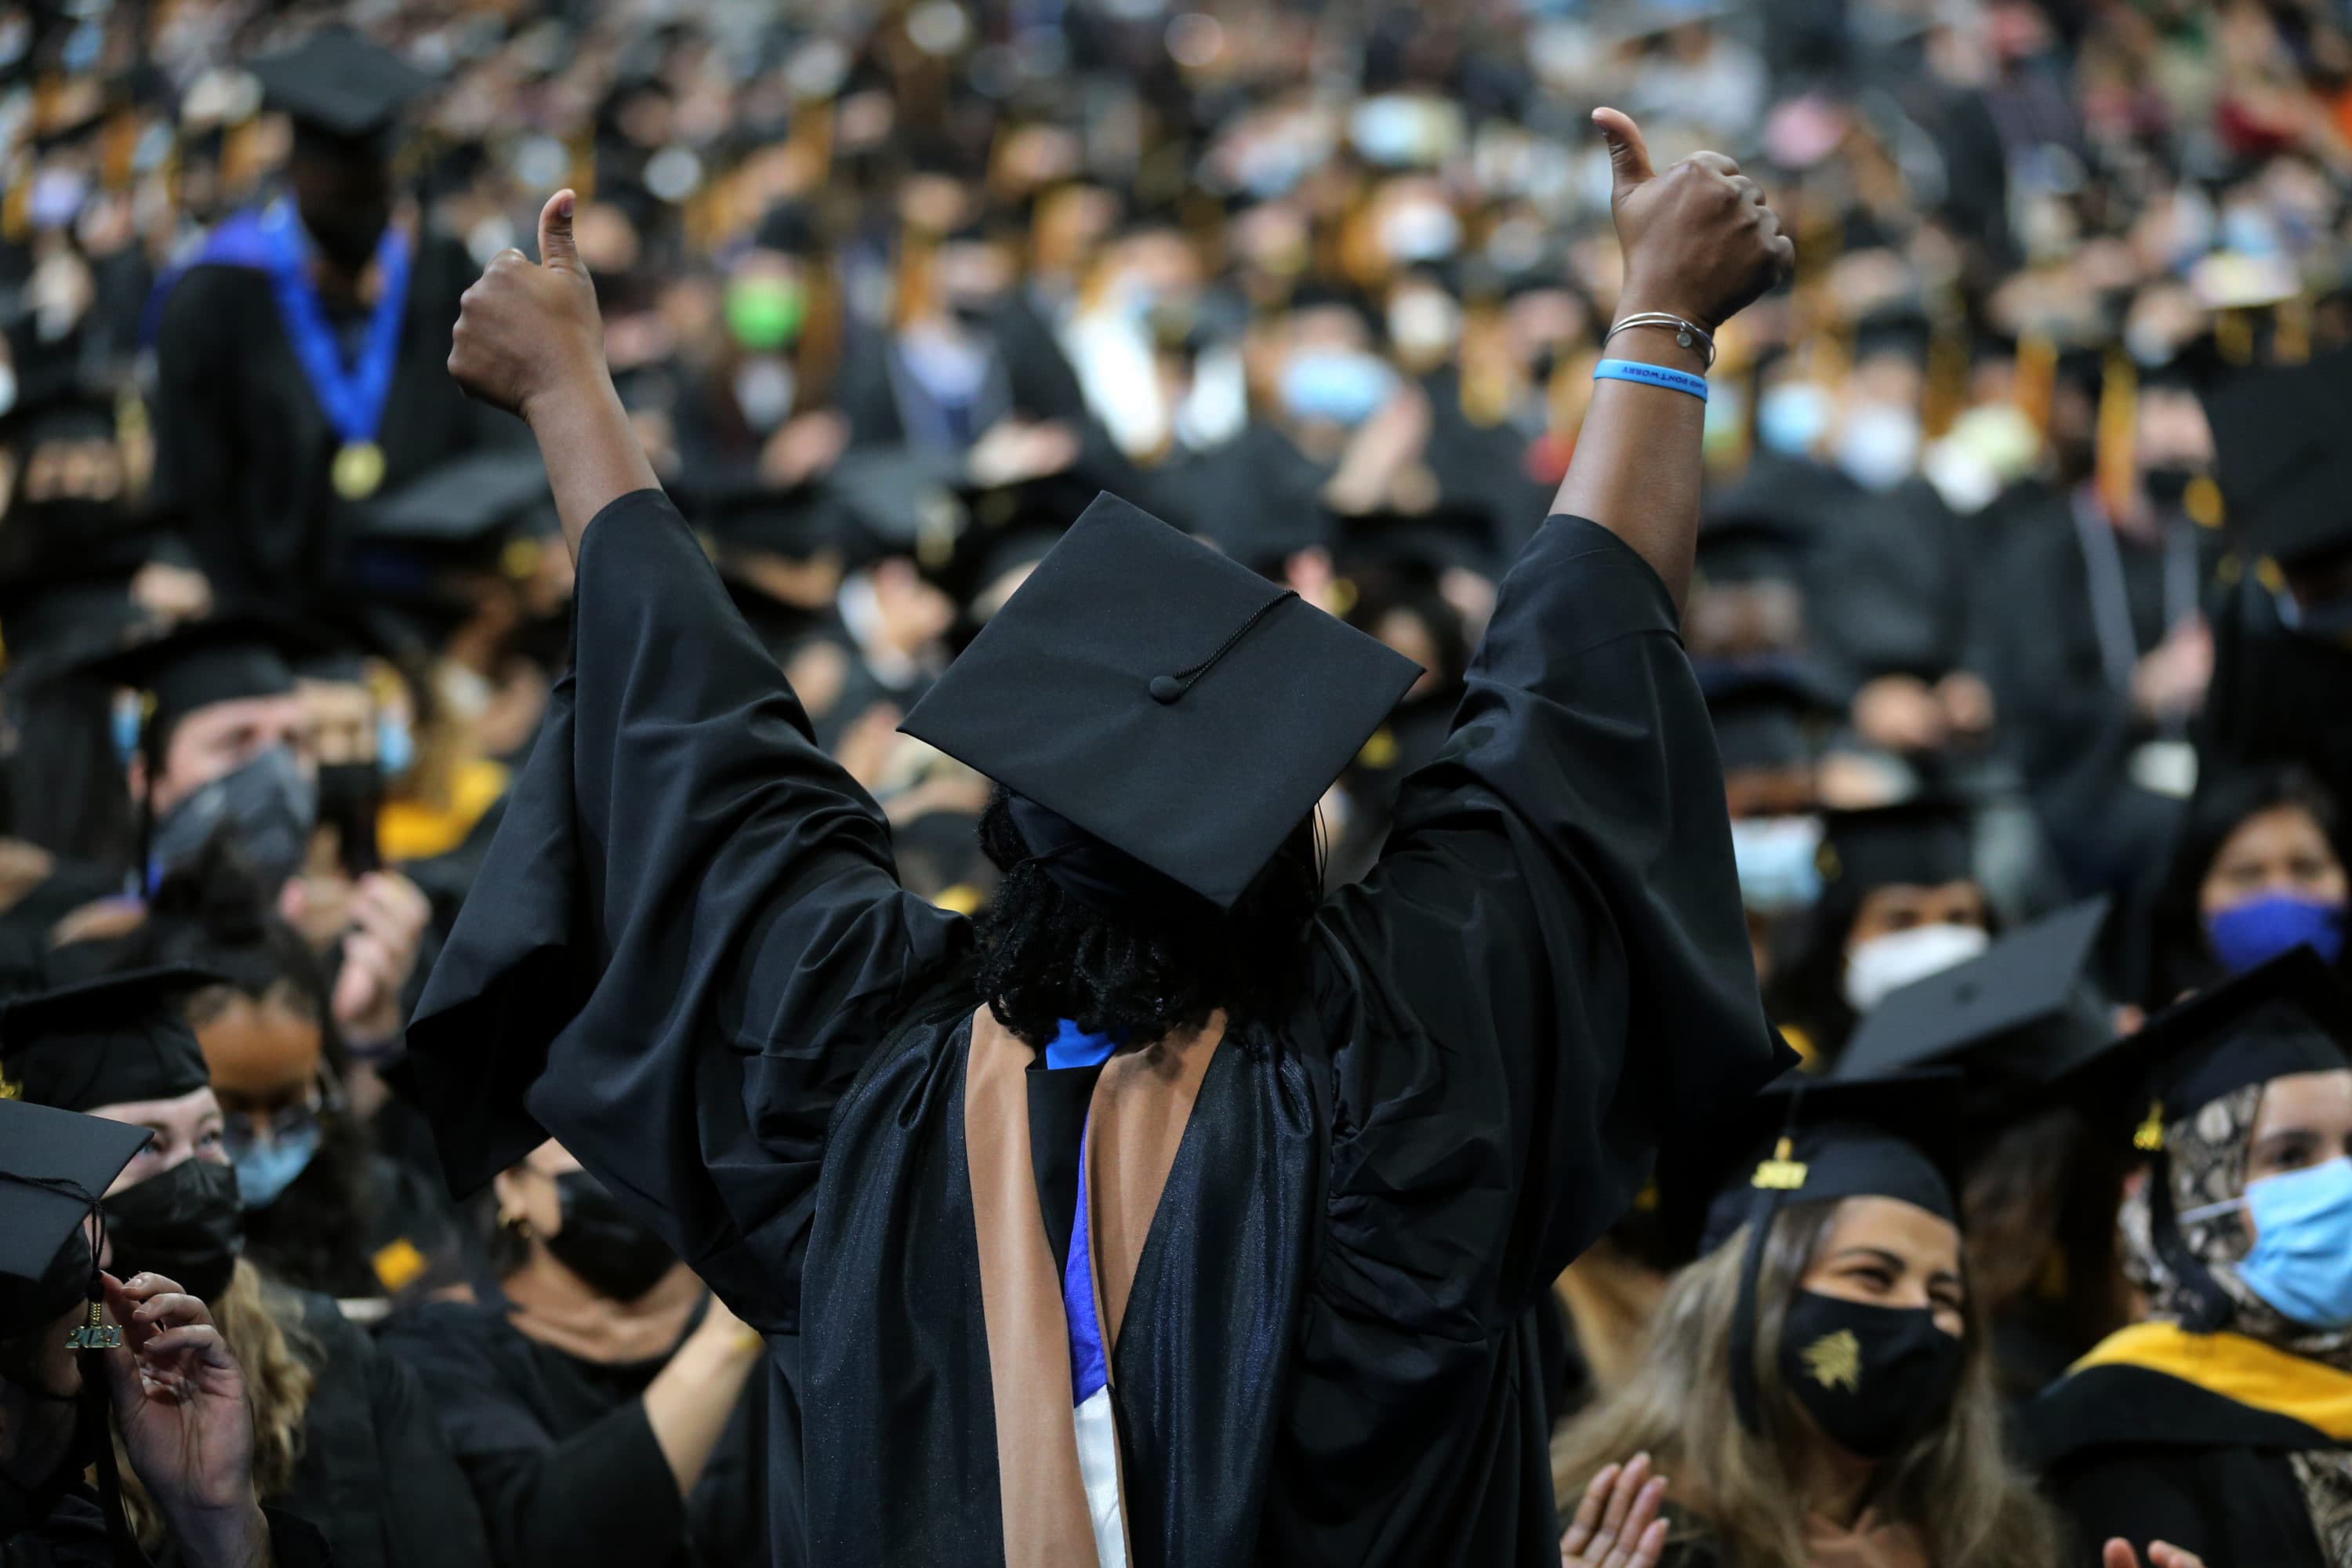 A student celebrates at the UMass Boston commencement ceremony at TD Garden in Boston in 2021. (Craig F. Walker/The Boston Globe via Getty Images)